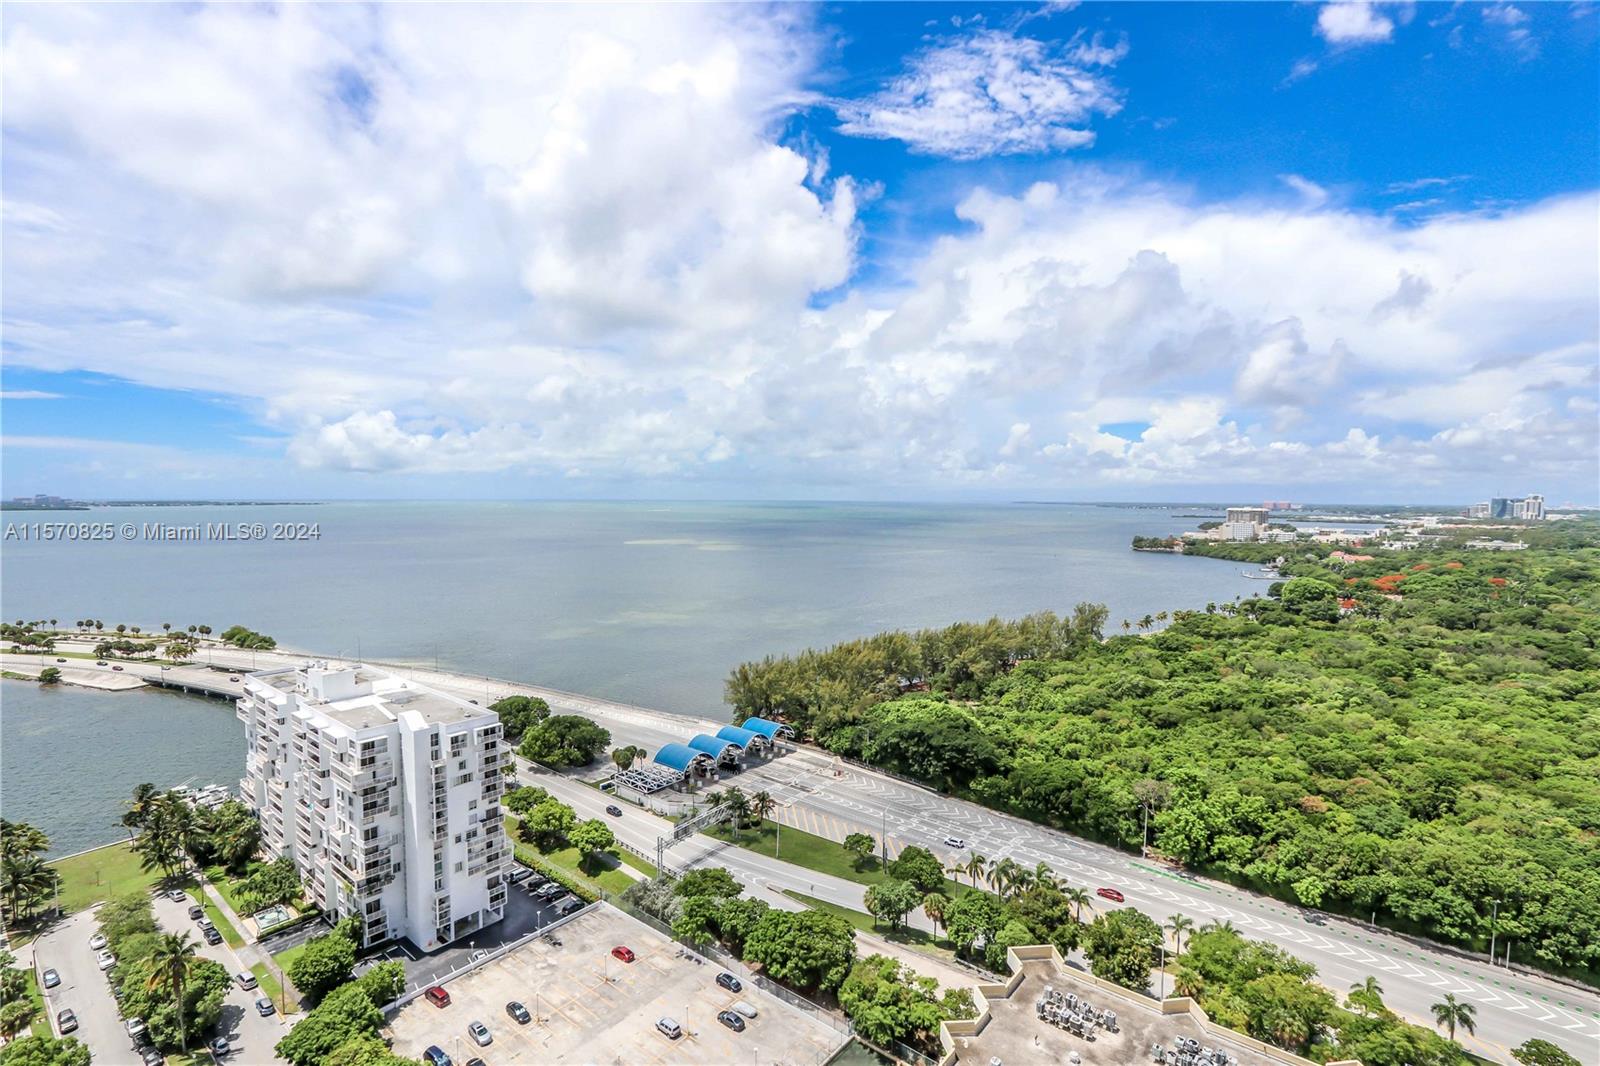 One of a kind penthouse in the gateway to Brickell. Breathtaking views of Biscayne Bay, Vizcaya, Wainwright Park, and Coconut Grove. Every room in this unique penthouse enjoys unobstructed views from living room, kitchen and bedroom. Unprecedented details such as high ceilings, marble flooring, granite countertops, and huge wrap around balcony that's perfect for entertaining. Enjoy upscale amenities like tennis, fitness center, swimming pool, media room, sauna, and mini market. Prime location within walking distance to park, jogging trail, beach, dining, shopping, and entertainment. 24-hour security, premium assigned parking & pet friendly.